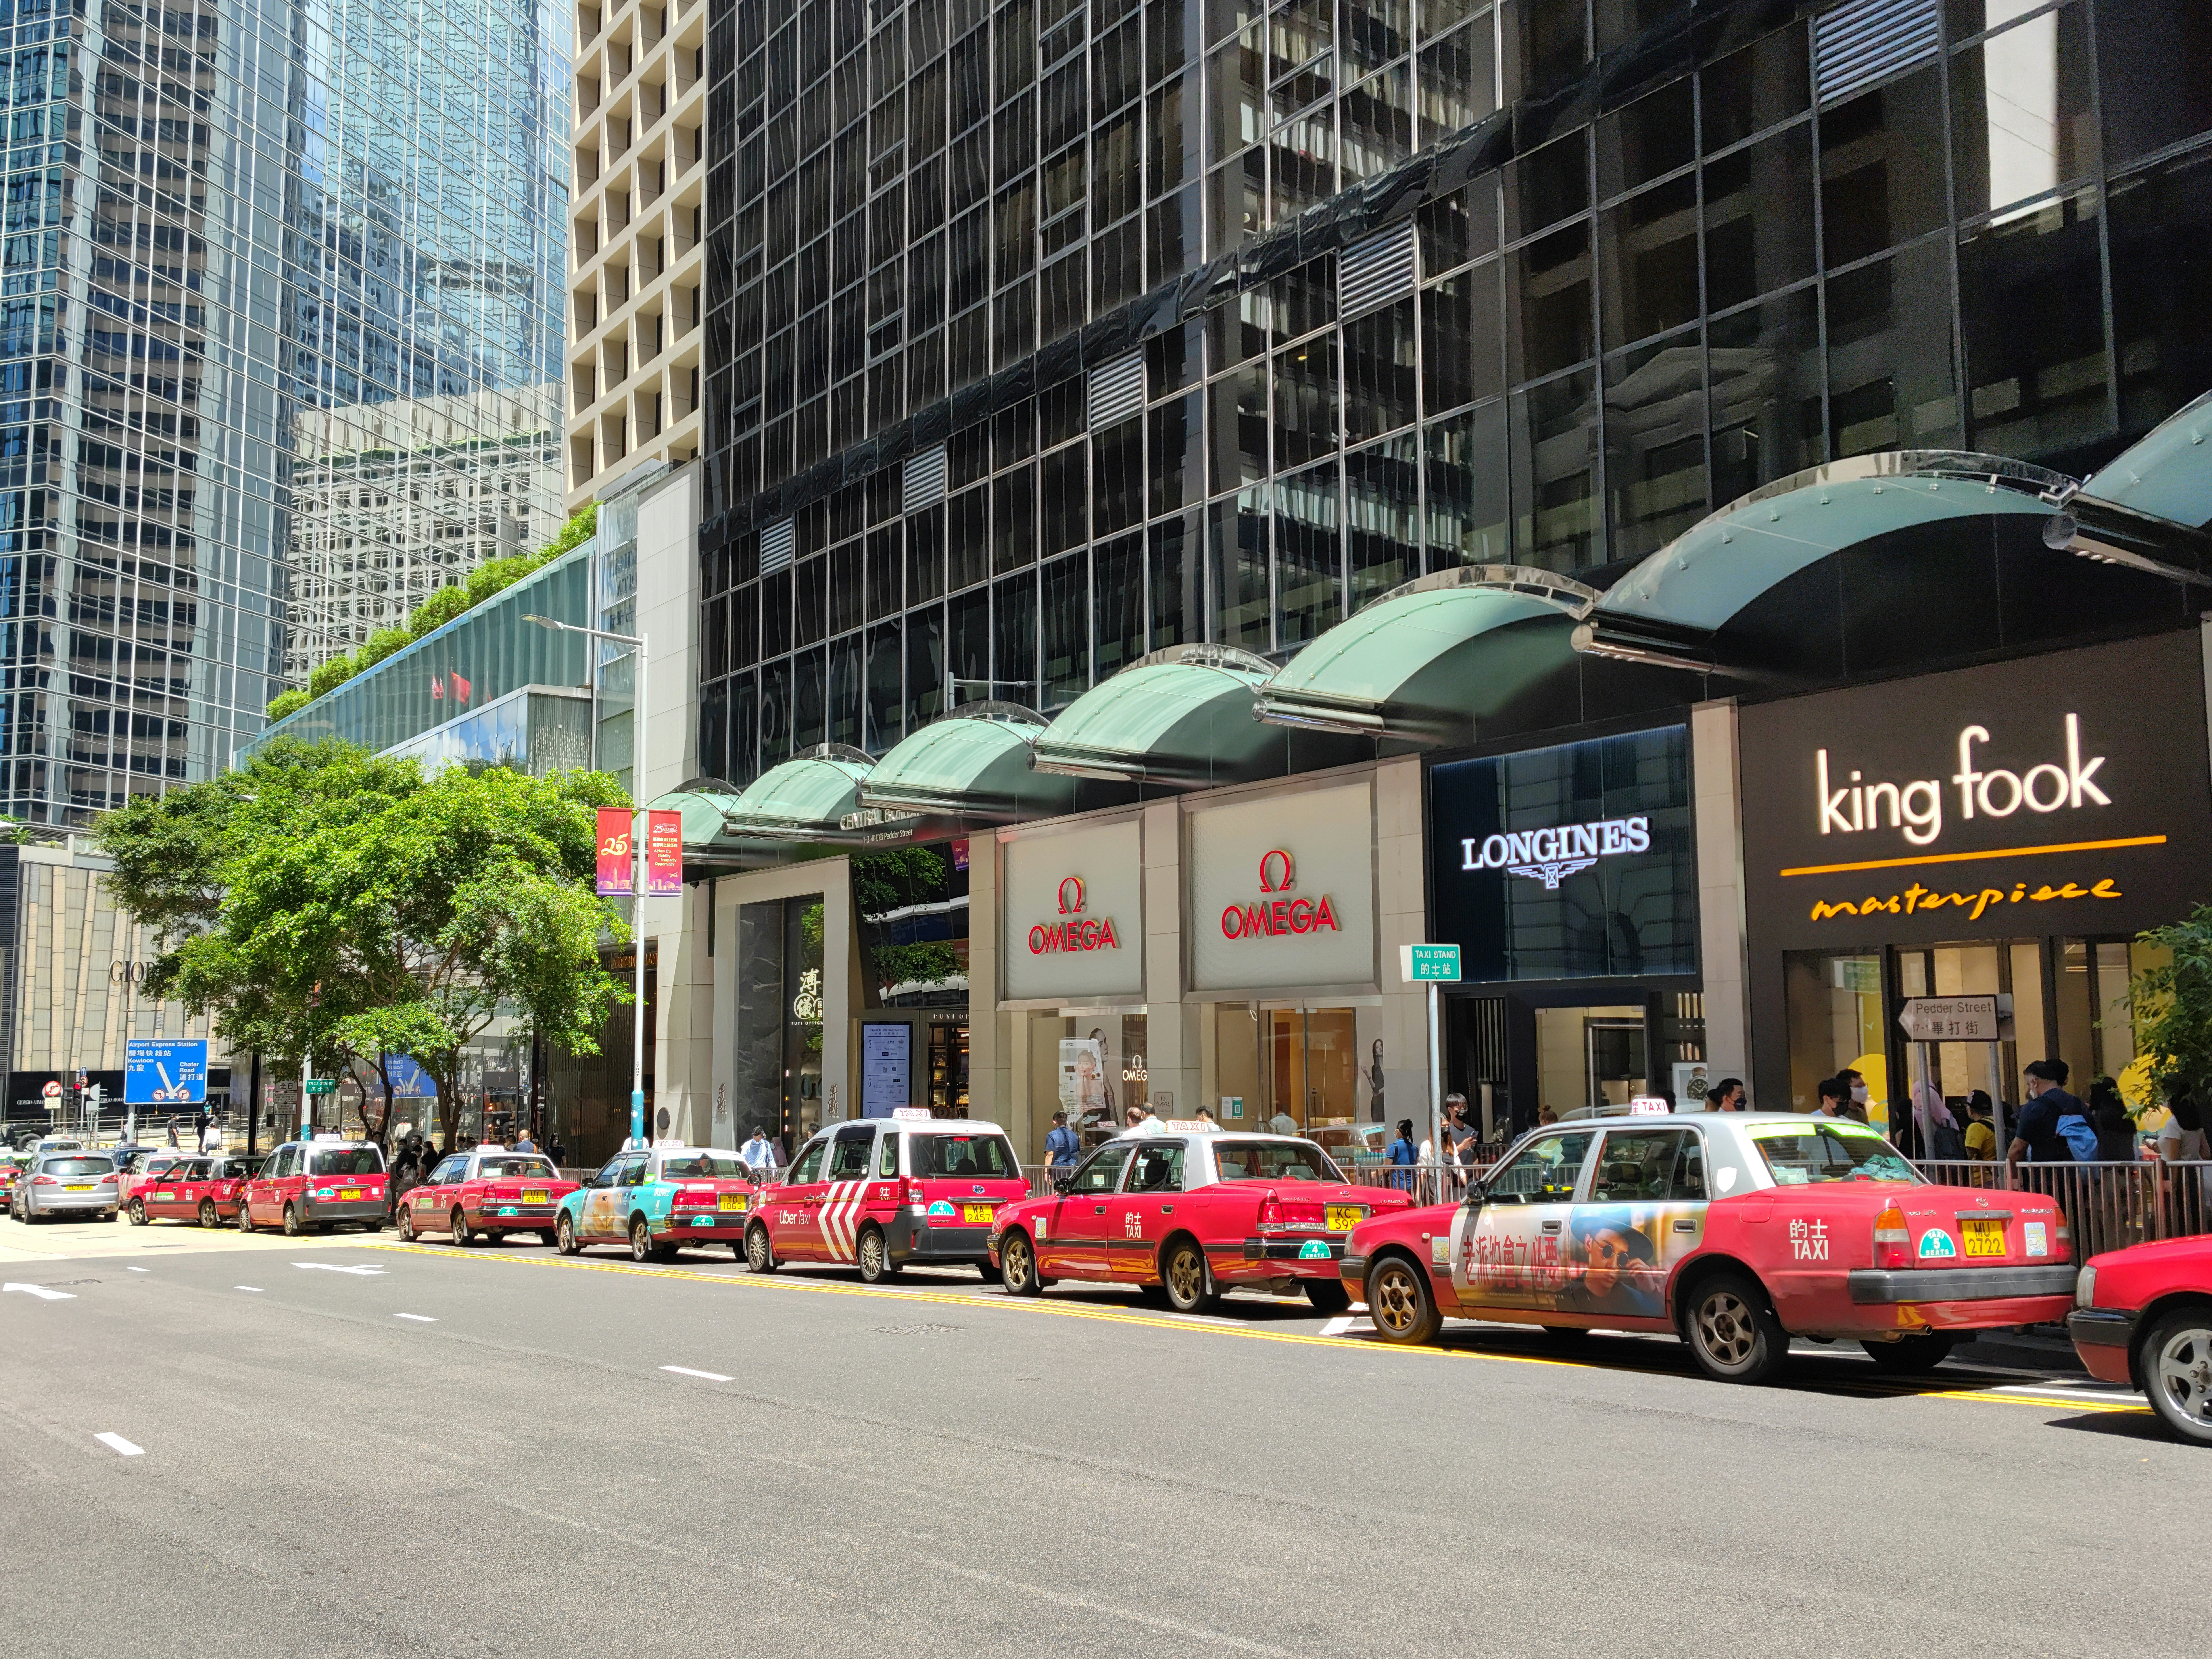 A popular taxi stand on Pedder Street in downtown Central District. In the past, it's a common scene to see passengers waiting for taxis at this taxi stand instead of taxis waiting for passengers. The long queue of taxis reflected that economic activities of the city has not yet returned to normal at this time during the Covid 19 pandemic when the number of visitors and travellers had greatly reduced.